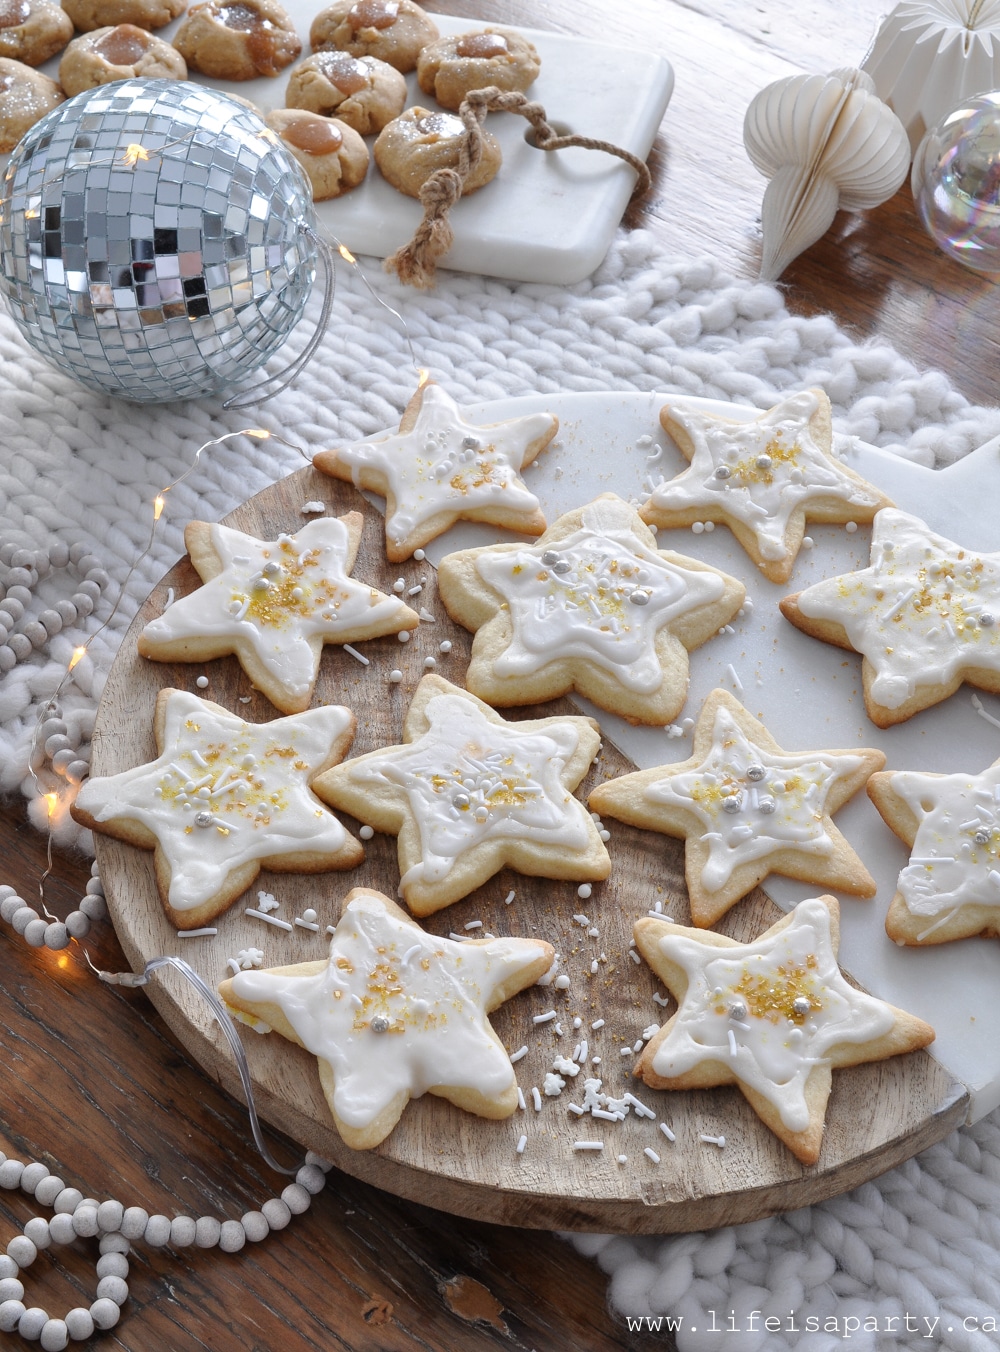 Sugar Cookies: Grandma's tested and true recipe will become your go-to recipe for soft and tender cut out sugar cookies you can decorate with icing.